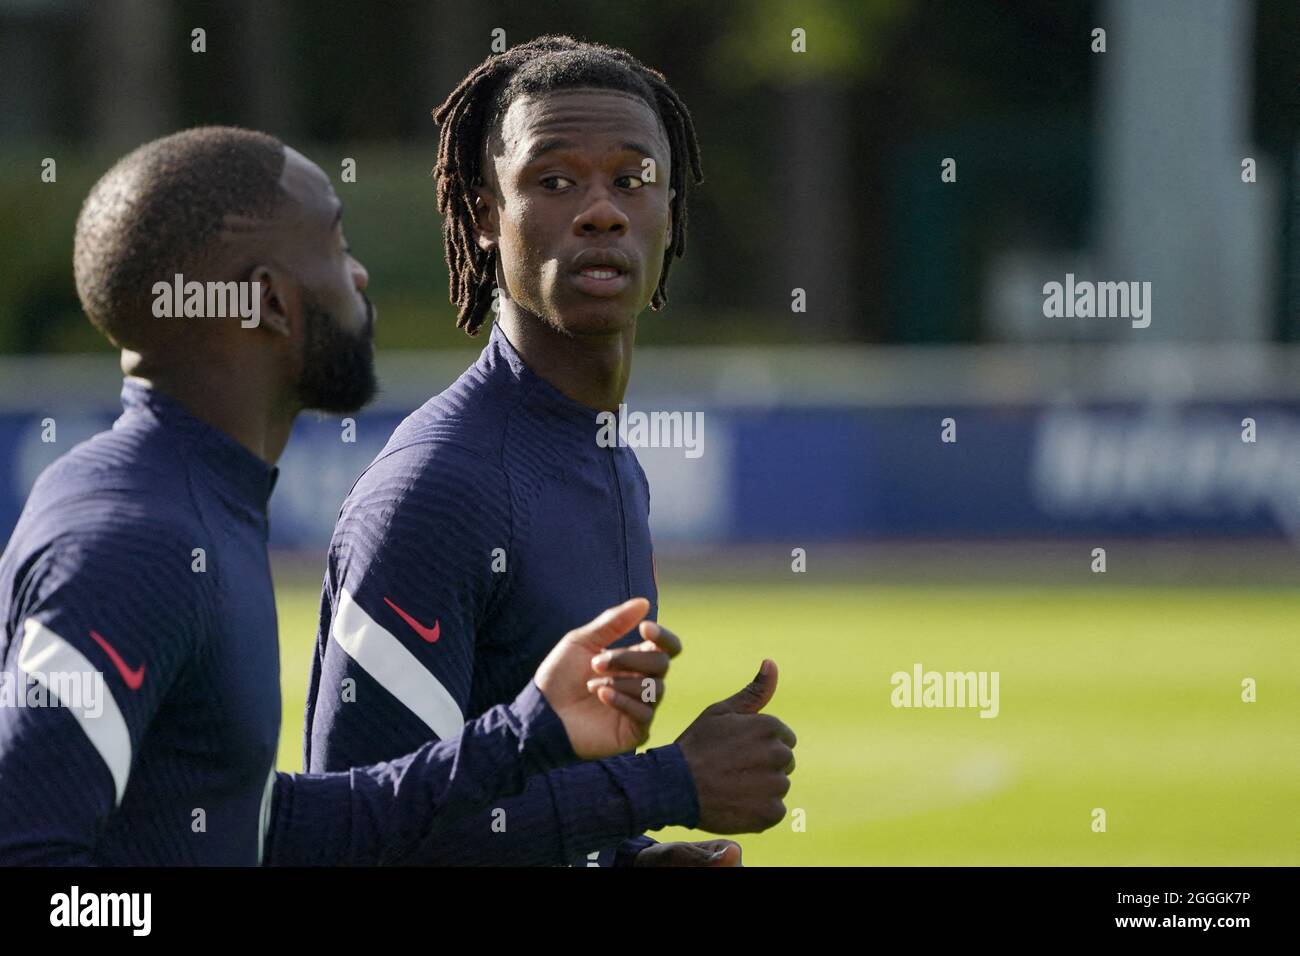 File photo dated August 31, 2020 of Eduardo Camavinga during a training session at the French National Football Centre in Clairefontaine, Yvelines, France. Real Madrid have signed highly-rated France midfielder Eduardo Camavinga from Rennes on a six-year deal. The 18-year-old had entered the final 12 months of his contract with the Ligue 1 club, who were not prepared to lose him on a free transfer next year. He completed his medical at France's Clairefontaine training centre on Monday. In April 2019, Camavinga became the youngest Rennes debutant aged 16 years and four months. Photo byABACAPRES Stock Photo